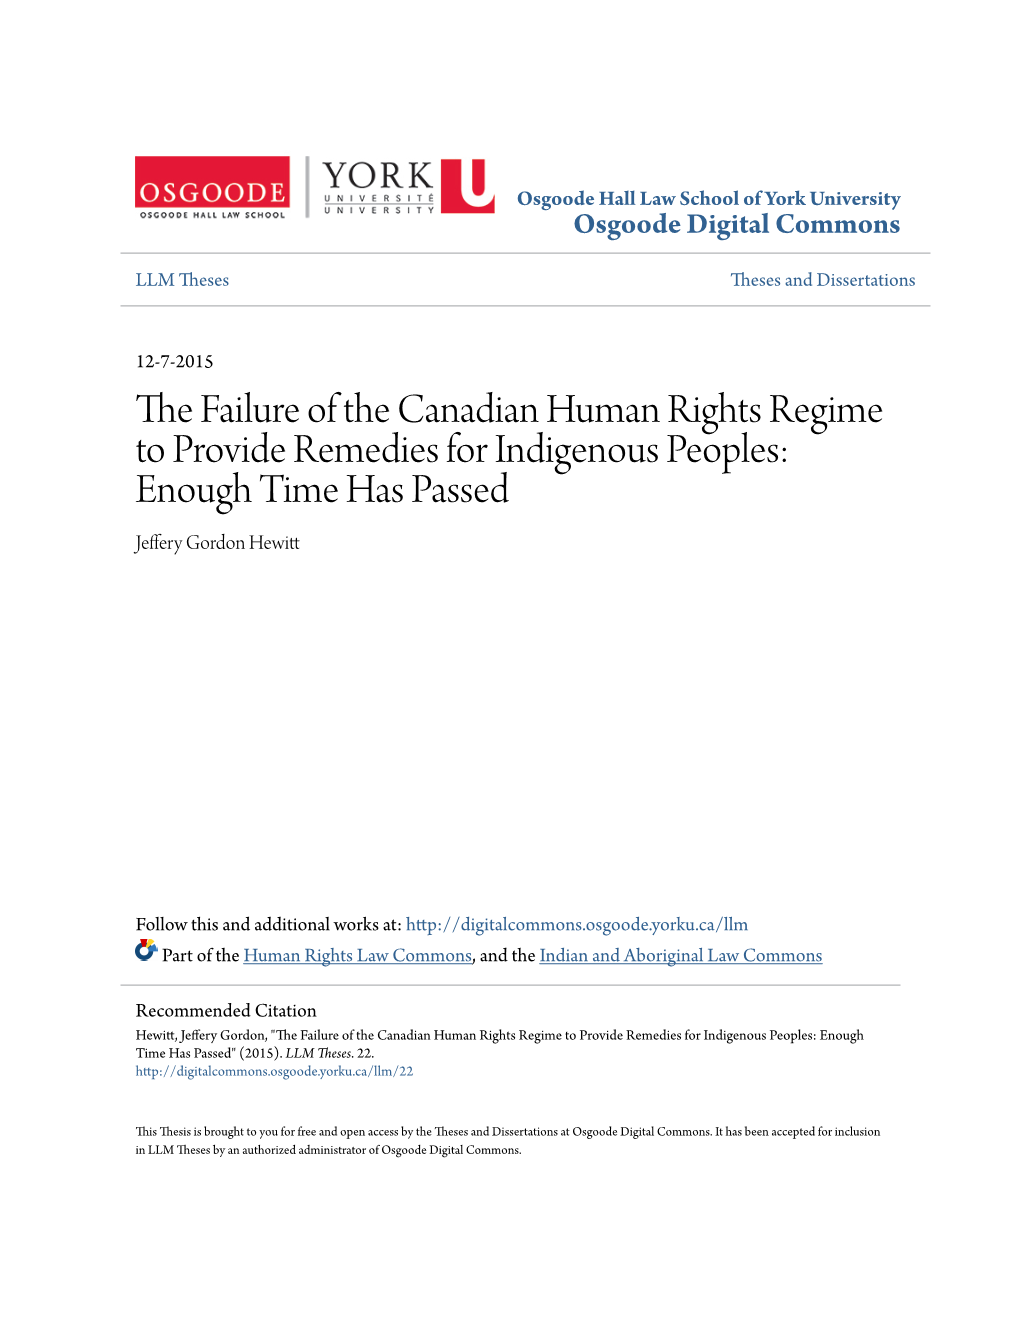 The Failure of the Canadian Human Rights Regime to Provide Remedies for Indigenous Peoples: Enough Time Has Passed